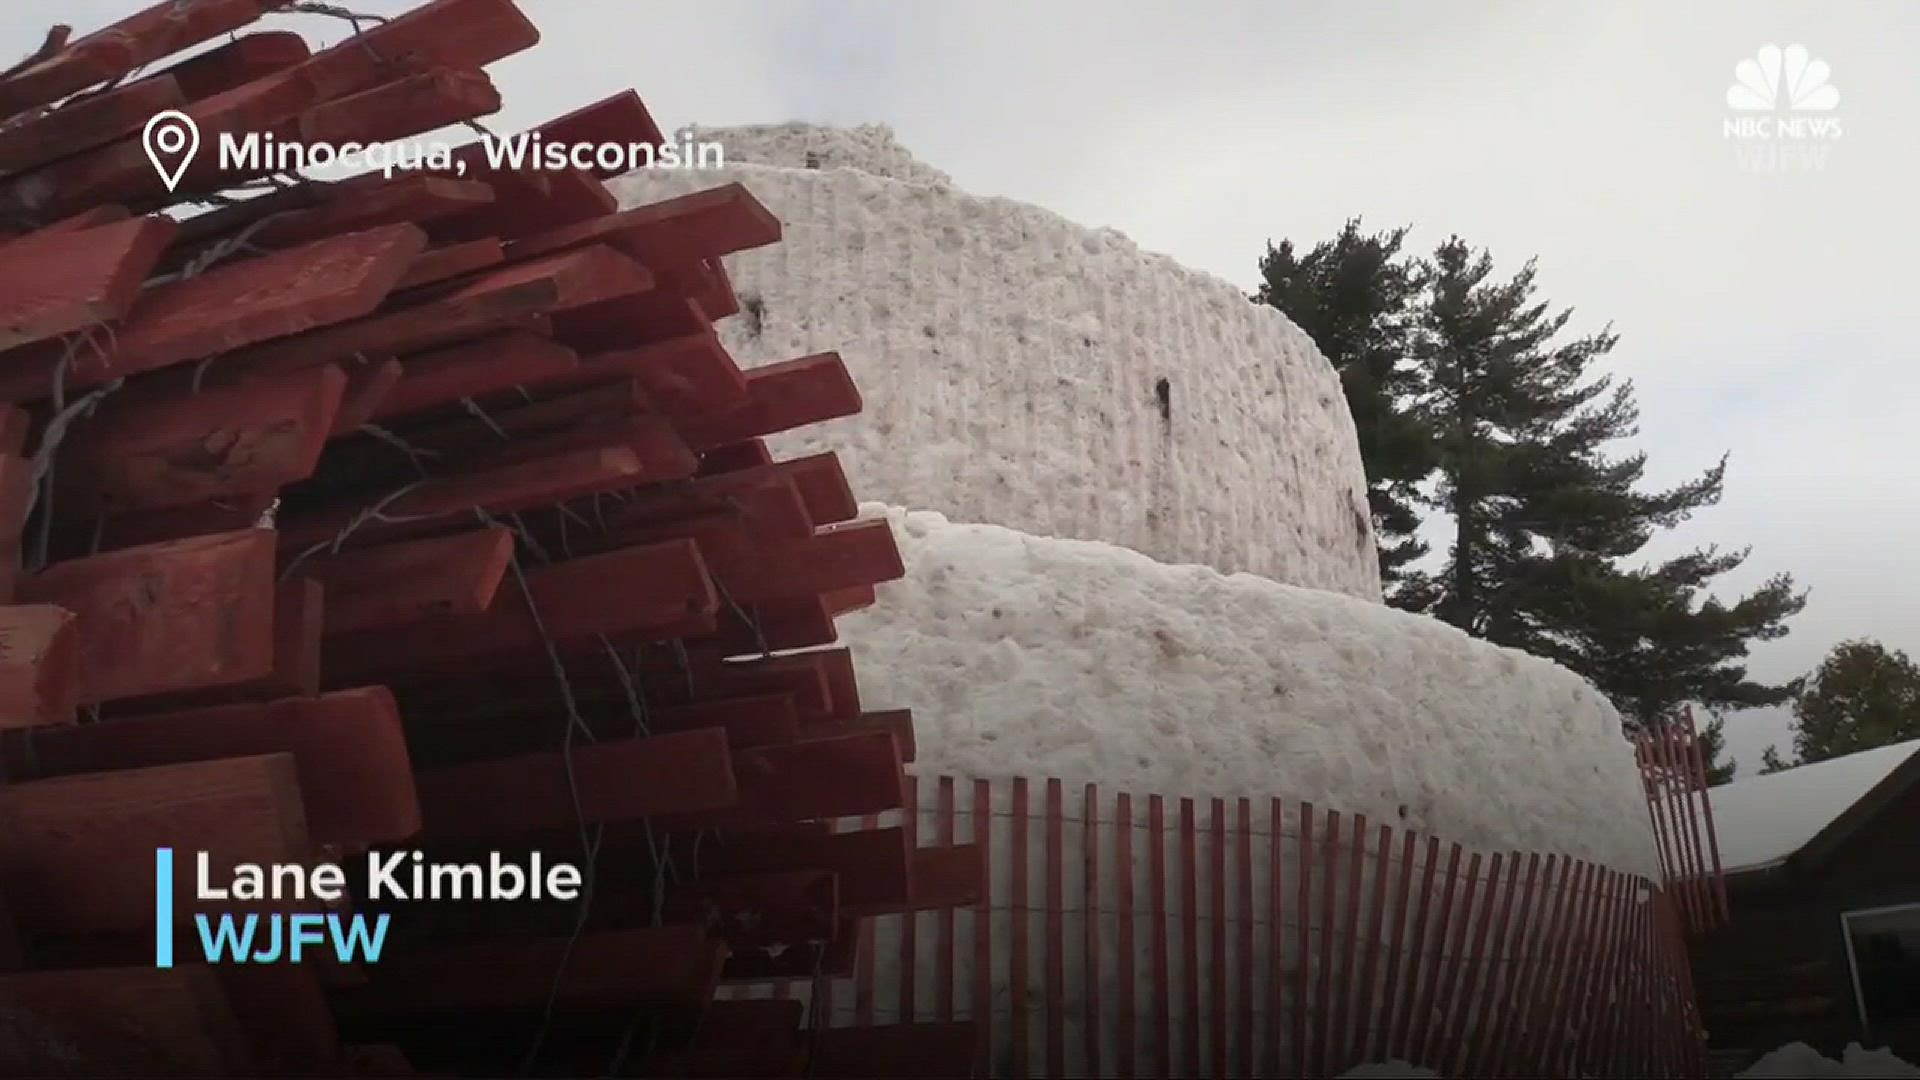 A community in Wisconsin has built their giant 30-foot-tall snowman after not being able to the past few years due to warm weather. WJFW's Lane Kimble reports.